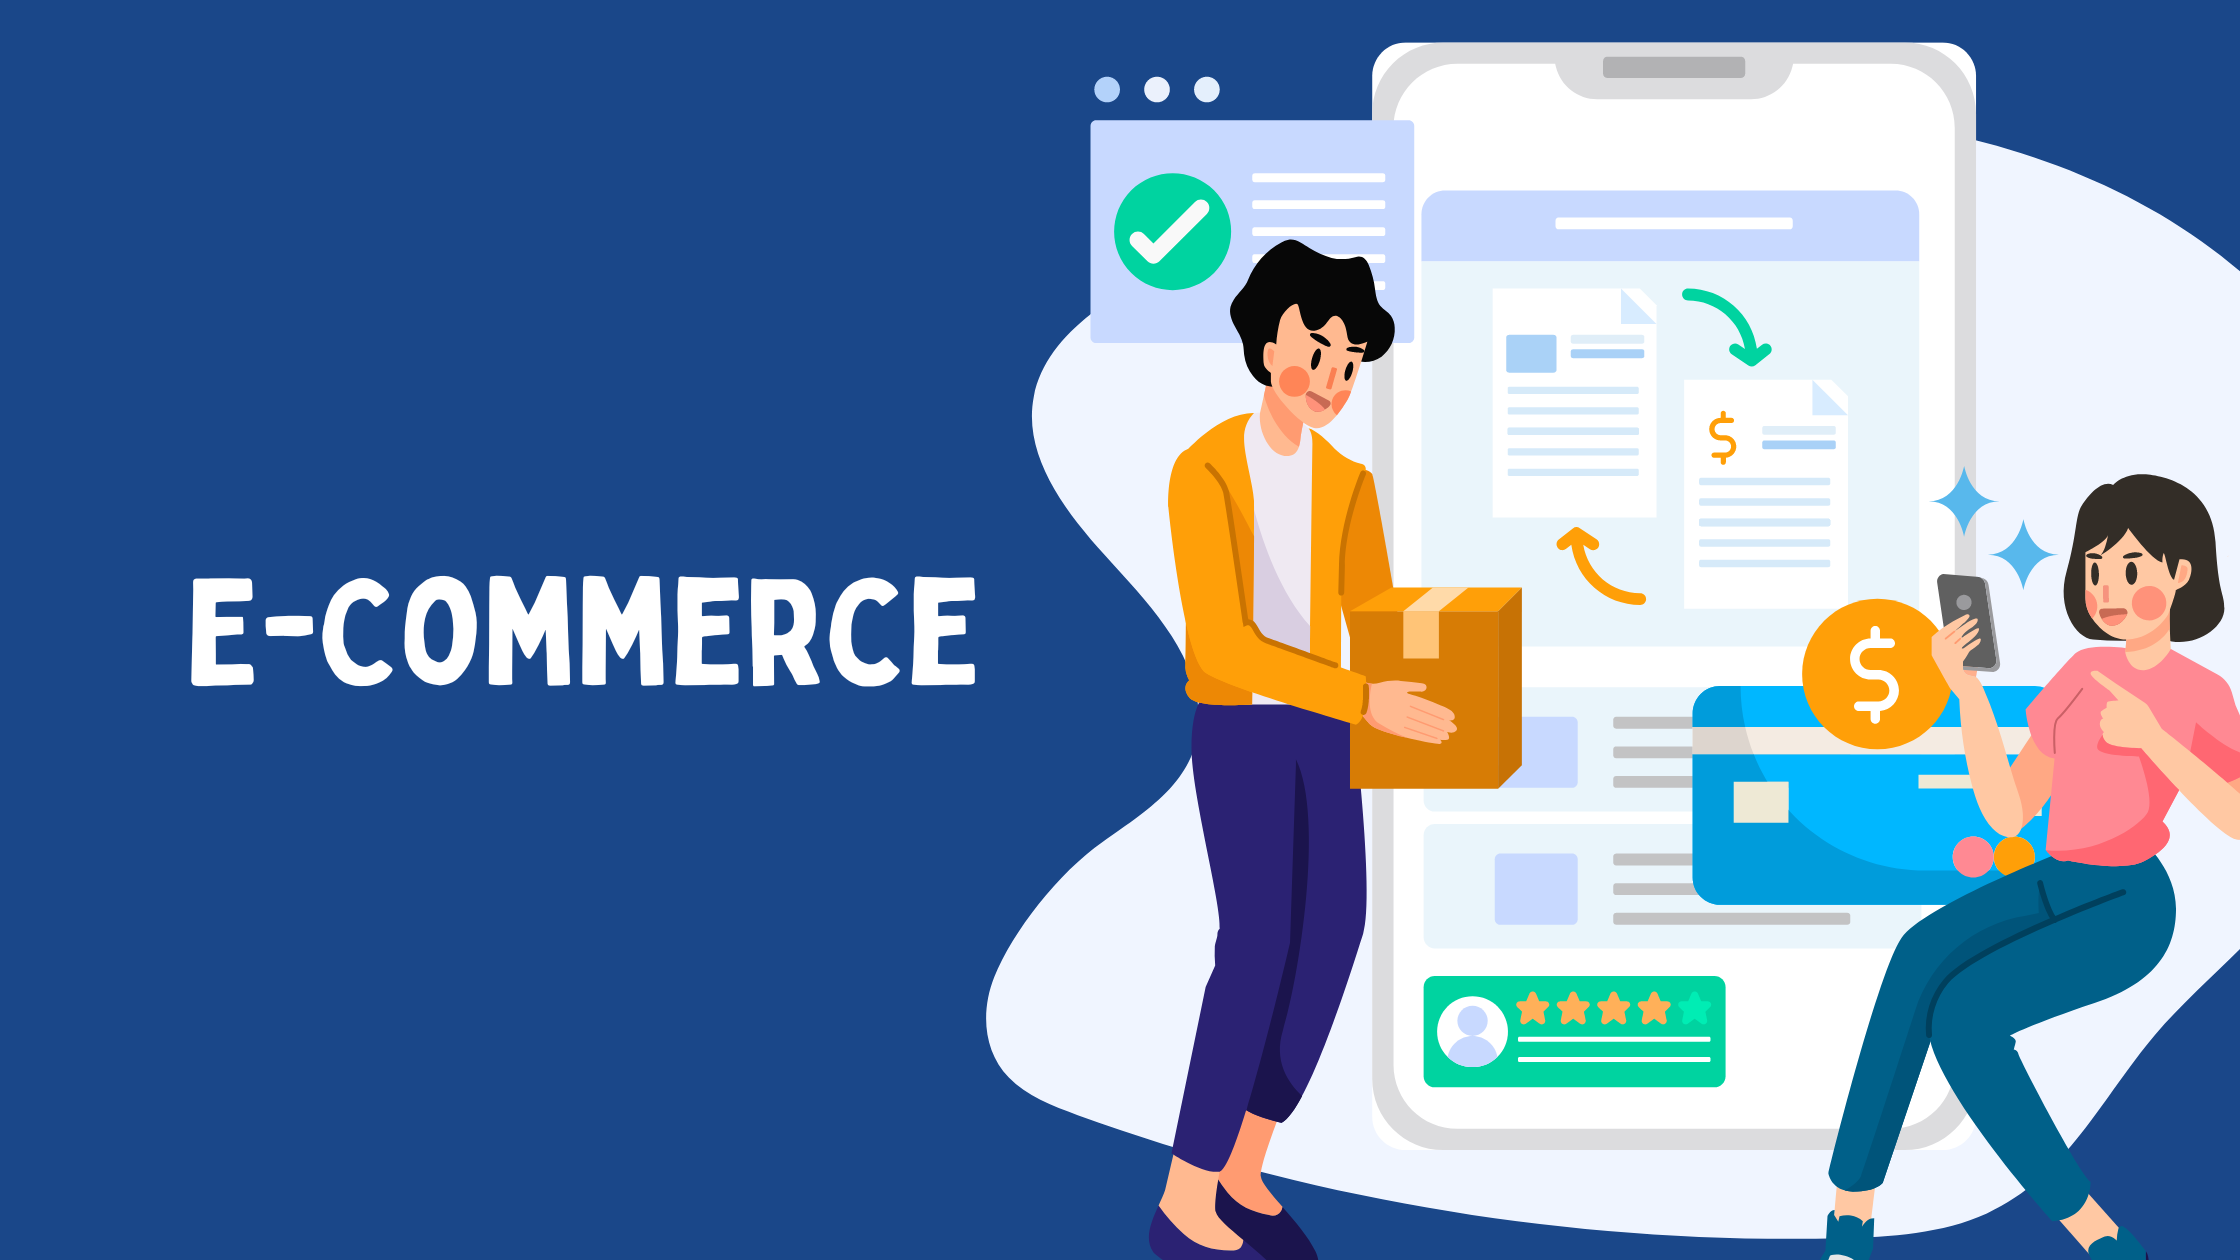 An Introduction to ecommerce, Growth of E-commerce in India